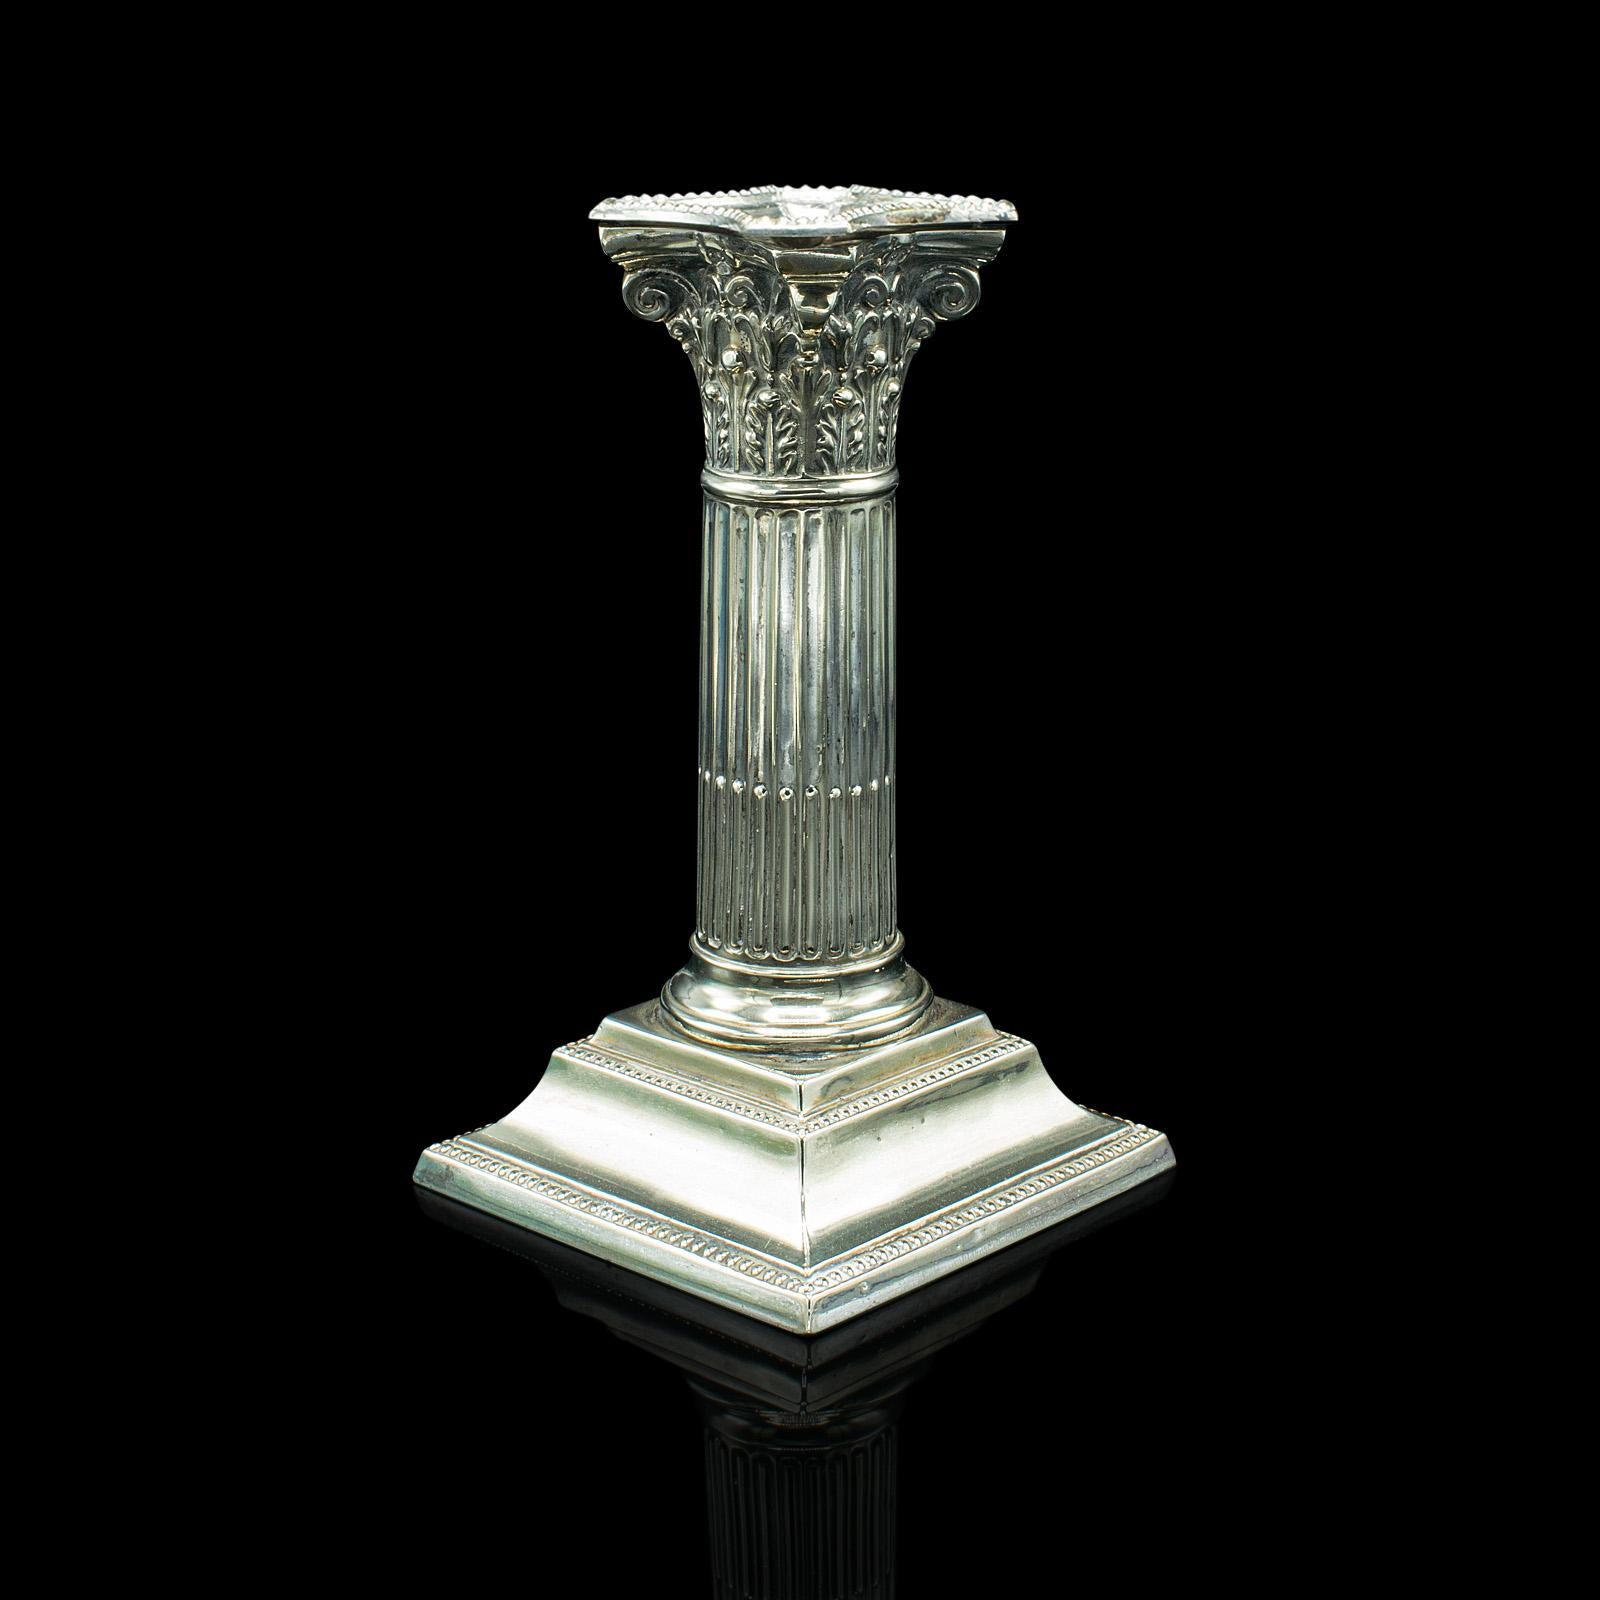 Pair of Antique Decorative Candlesticks, Italian, Silver Plate, Grand Tour, 1860 In Good Condition For Sale In Hele, Devon, GB